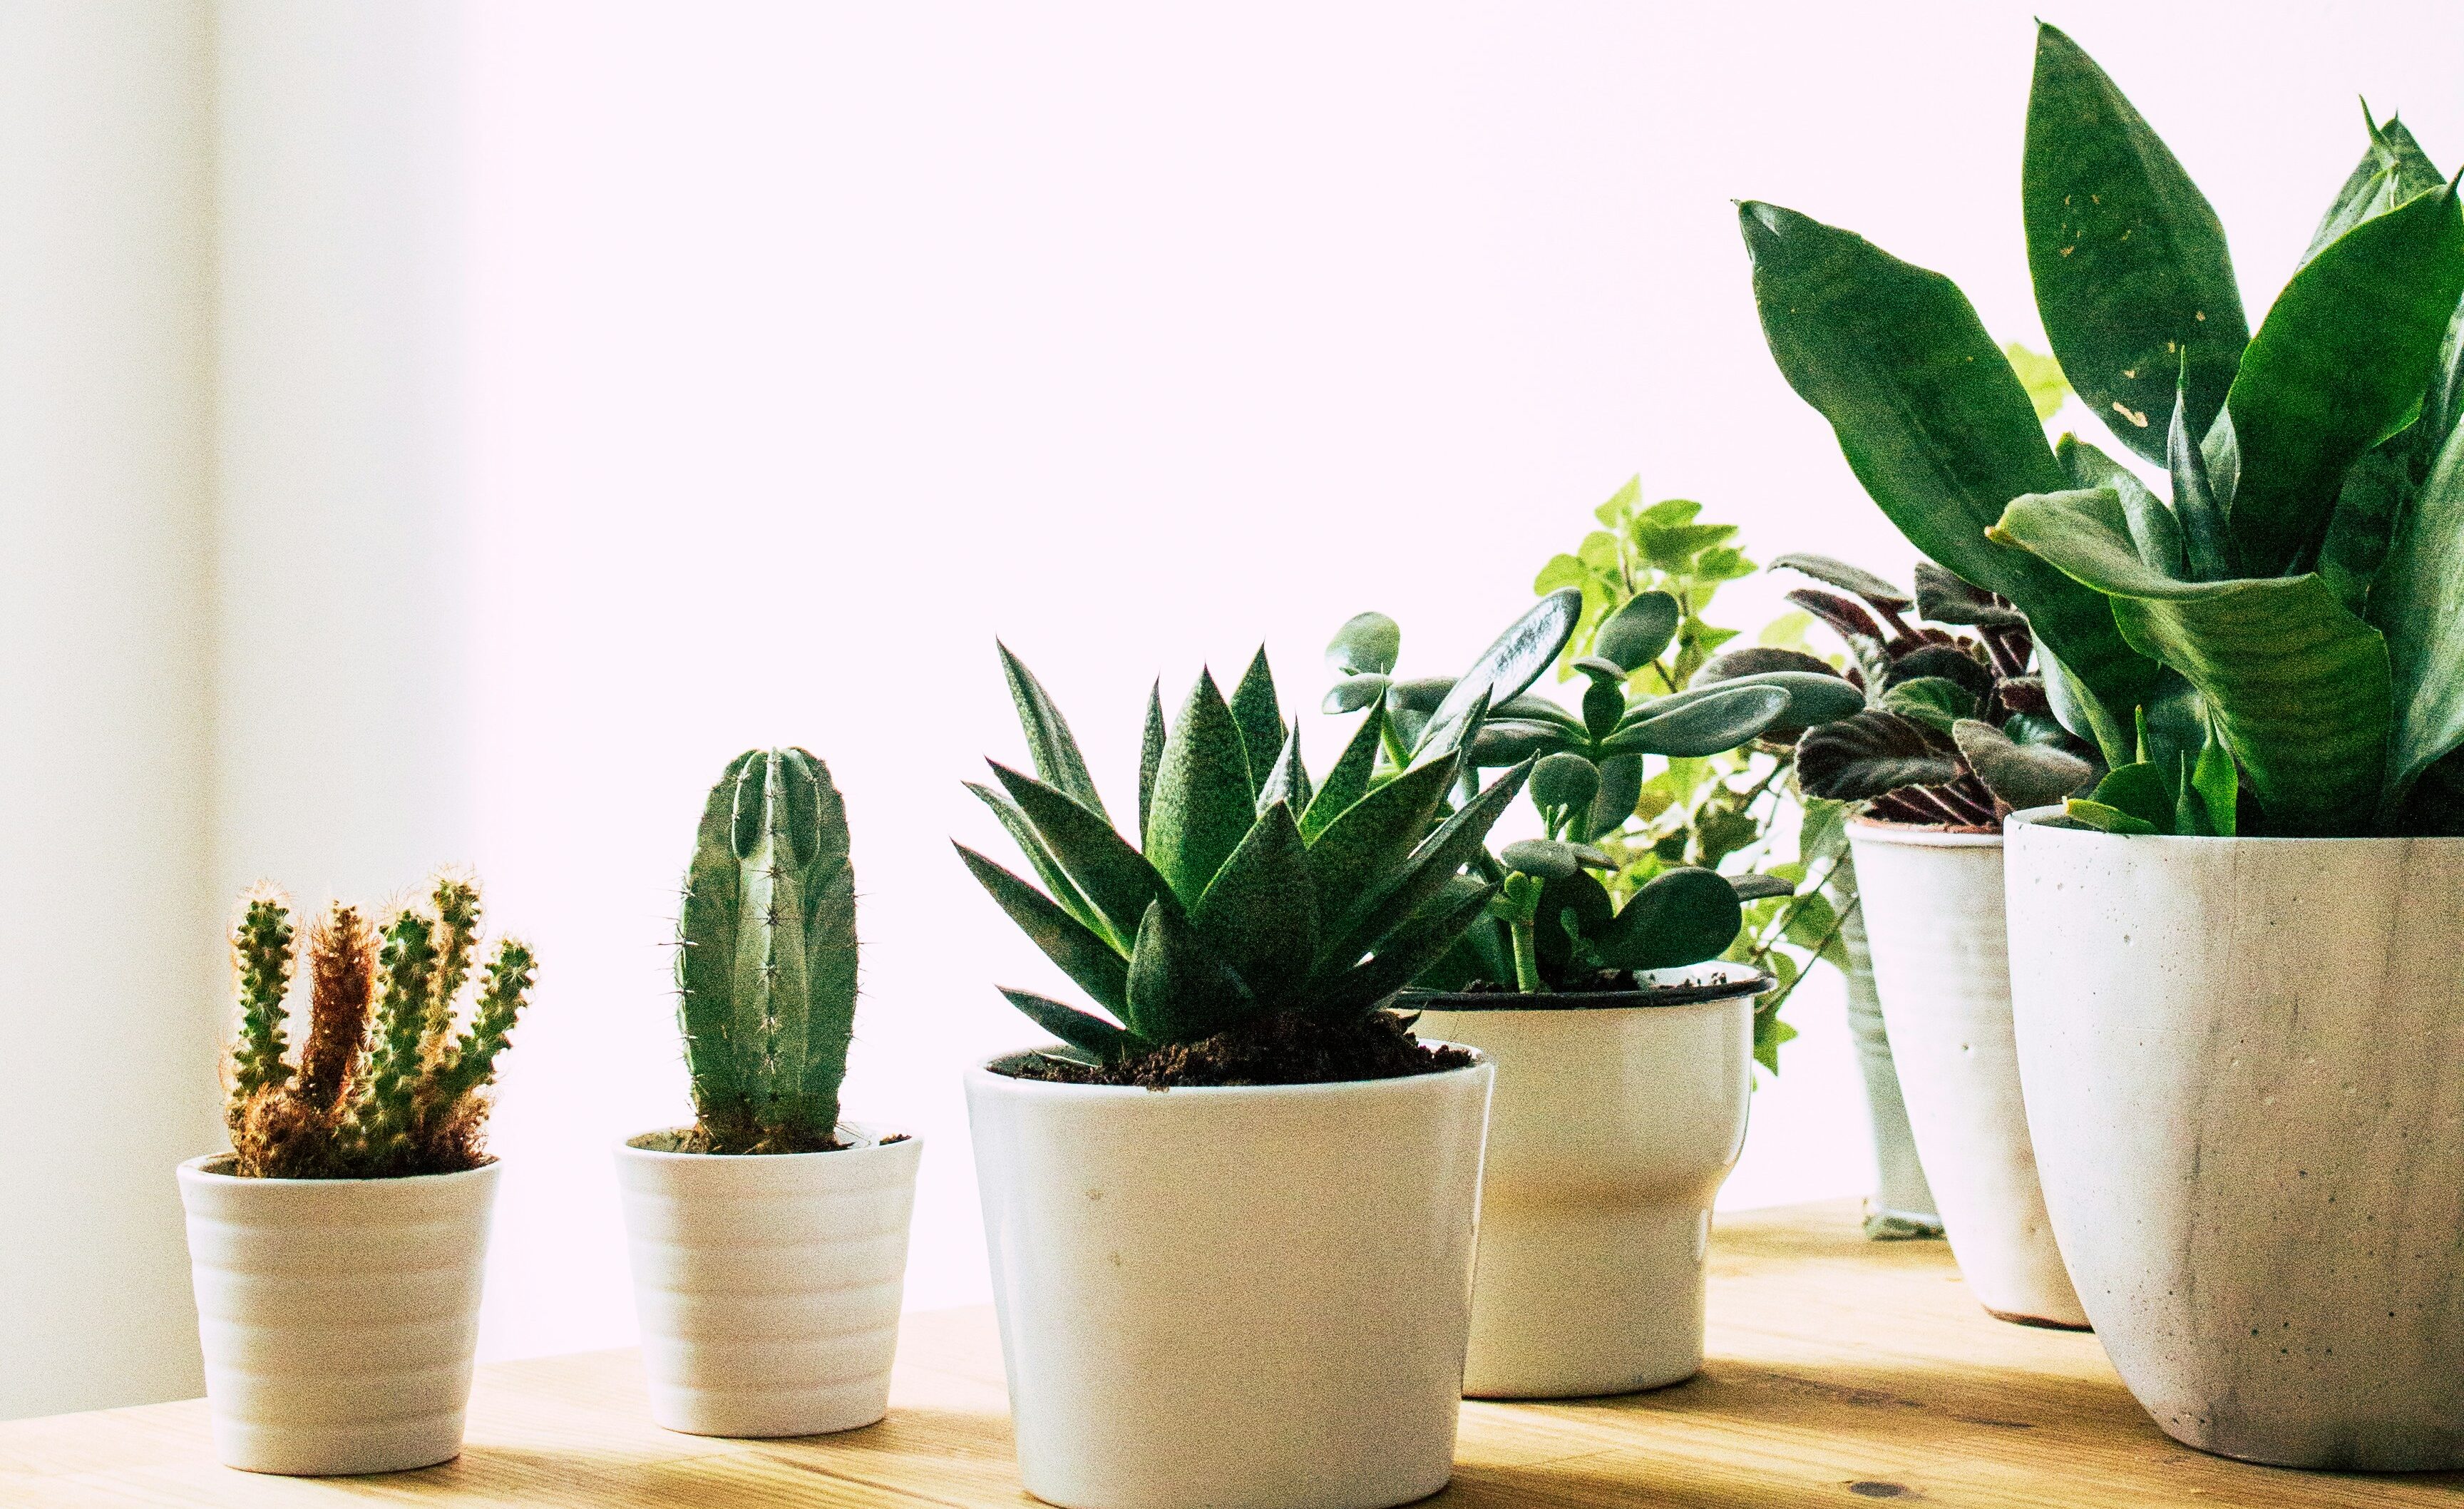 Spring home updates: potted plants